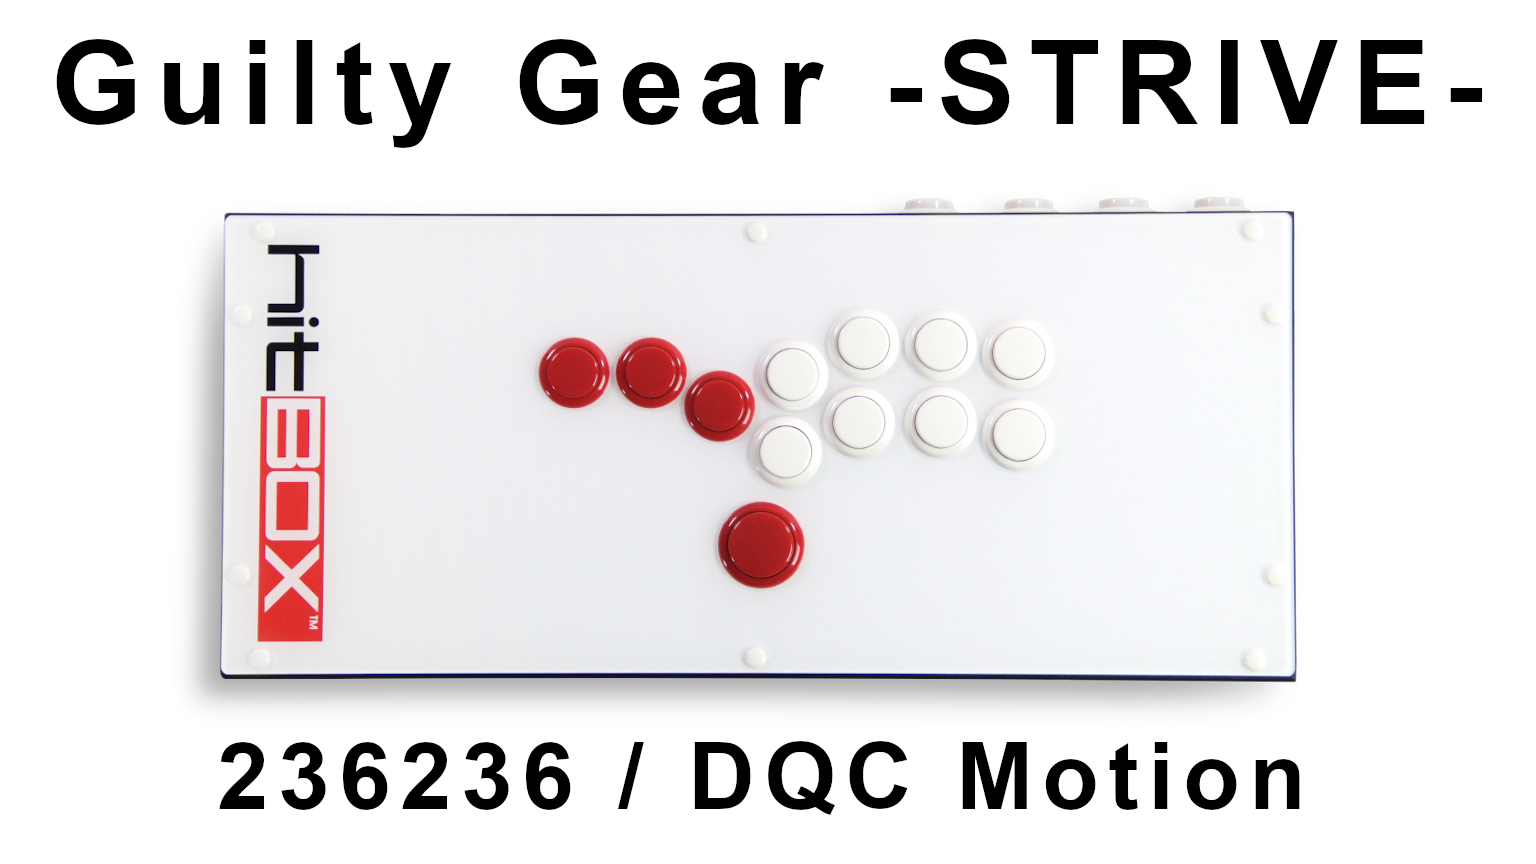 Guilty Gear -STRIVE- on Hit Box - 236236 / DQC Motion